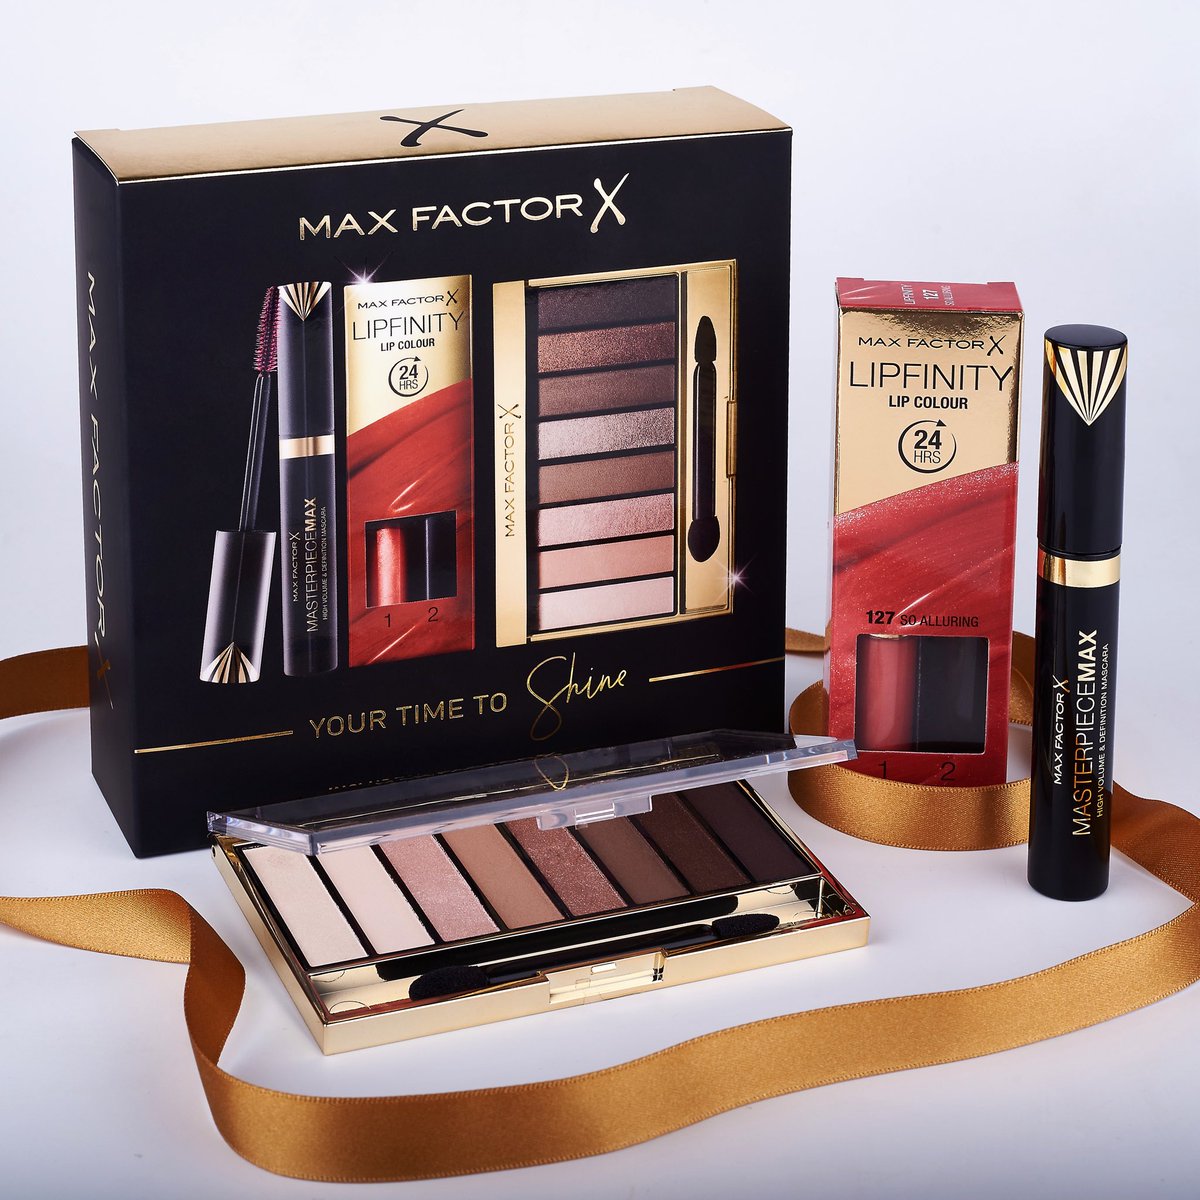 Whether you’re shopping for your mum, step-mum, mentor or glam-ma, treat them to a present they’re guaranteed to love 💕 Our most iconic products are now available in this dreamy giftset for Mother’s day, at @bootsuk now 🙌 #YourTimeToShine #MothersDay #MaxFactor